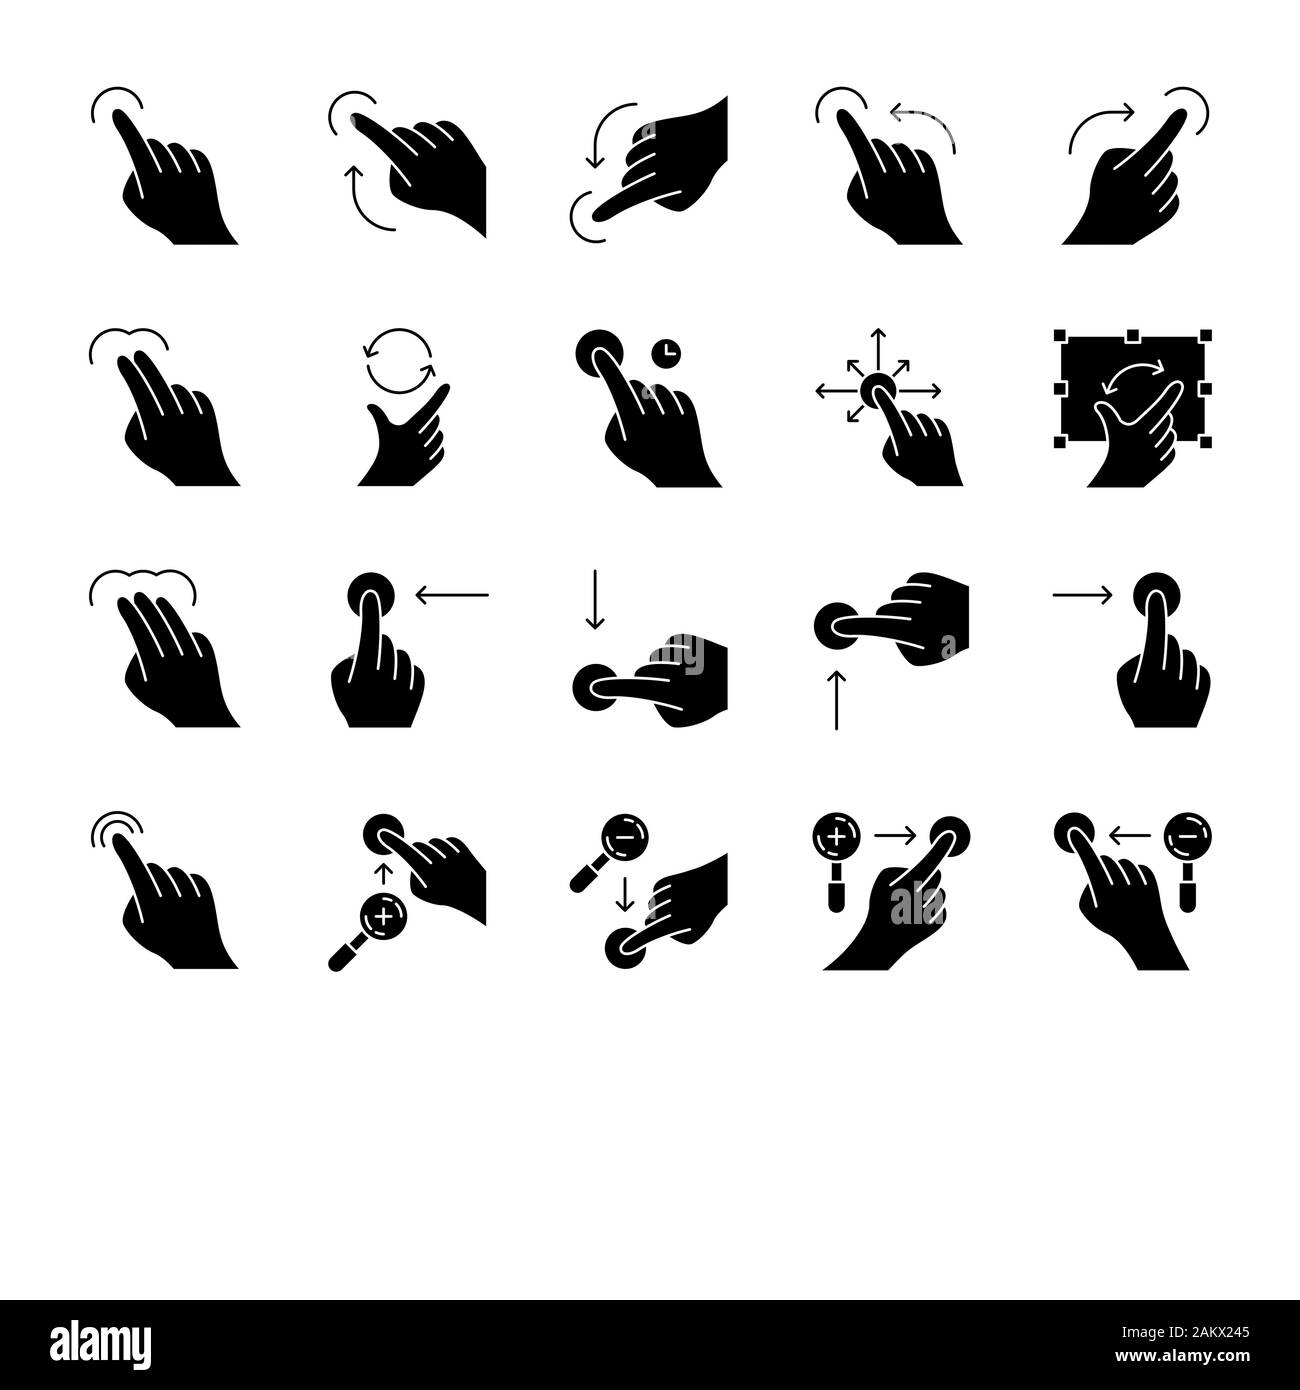 Touchscreen gestures glyph icons set. Tap, point, 2x tap, 3x click gesturing. Flick, zoom gesture. Scroll up, down. Drag finger all directions. Silhou Stock Vector